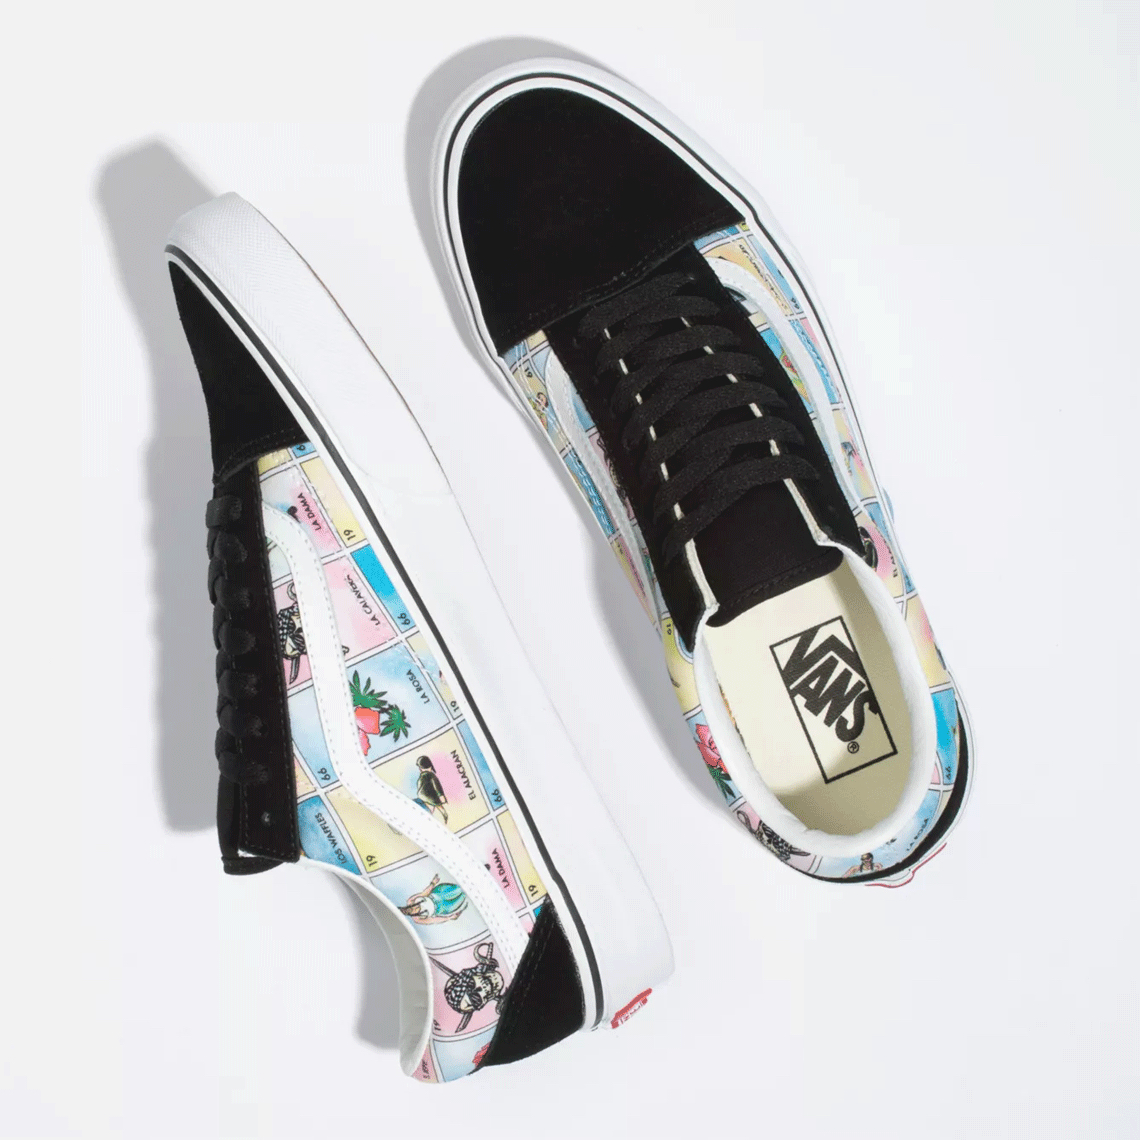 Los vans the simpsons 30th anniversary capsule collection release date Loteria 3